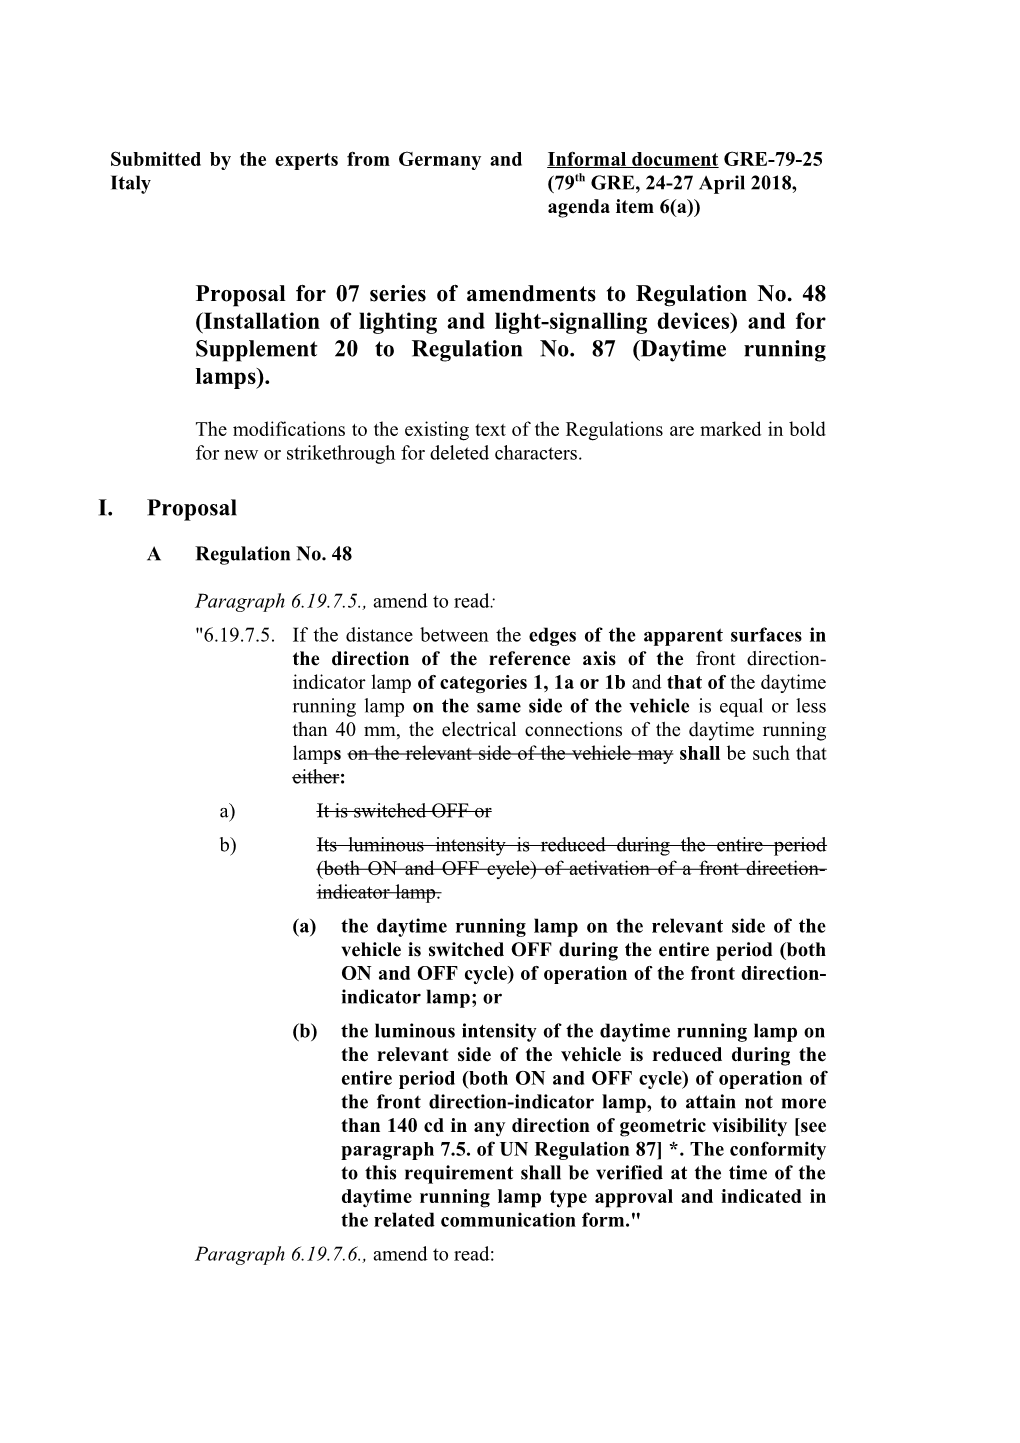 Proposal for 07 Series of Amendments to Regulation No. 48 (Installation of Lighting And